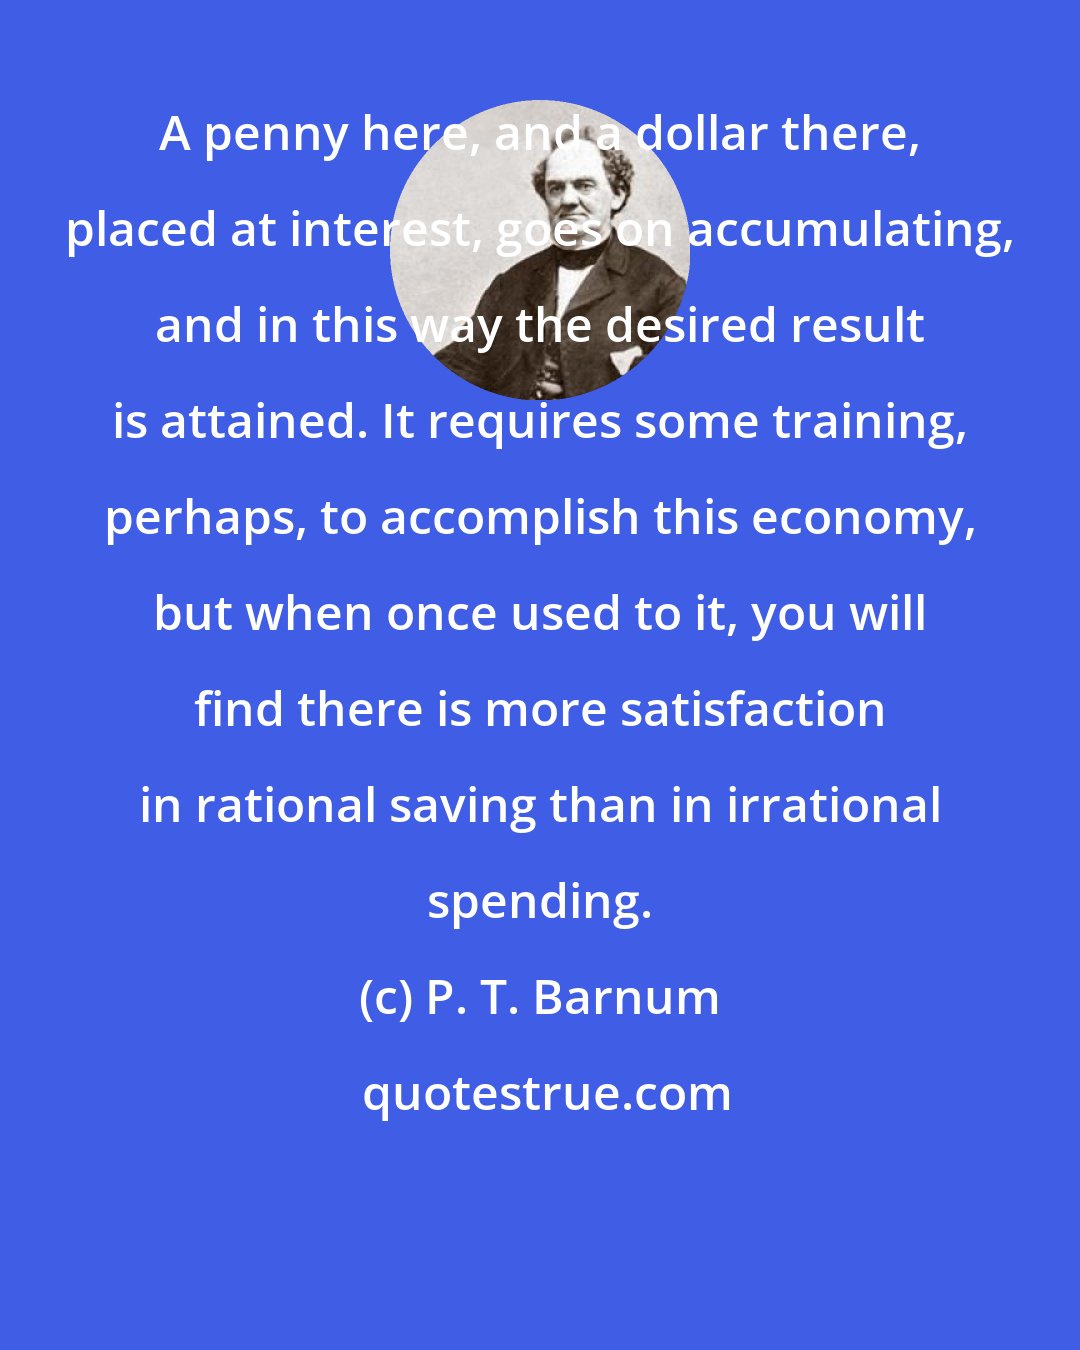 P. T. Barnum: A penny here, and a dollar there, placed at interest, goes on accumulating, and in this way the desired result is attained. It requires some training, perhaps, to accomplish this economy, but when once used to it, you will find there is more satisfaction in rational saving than in irrational spending.